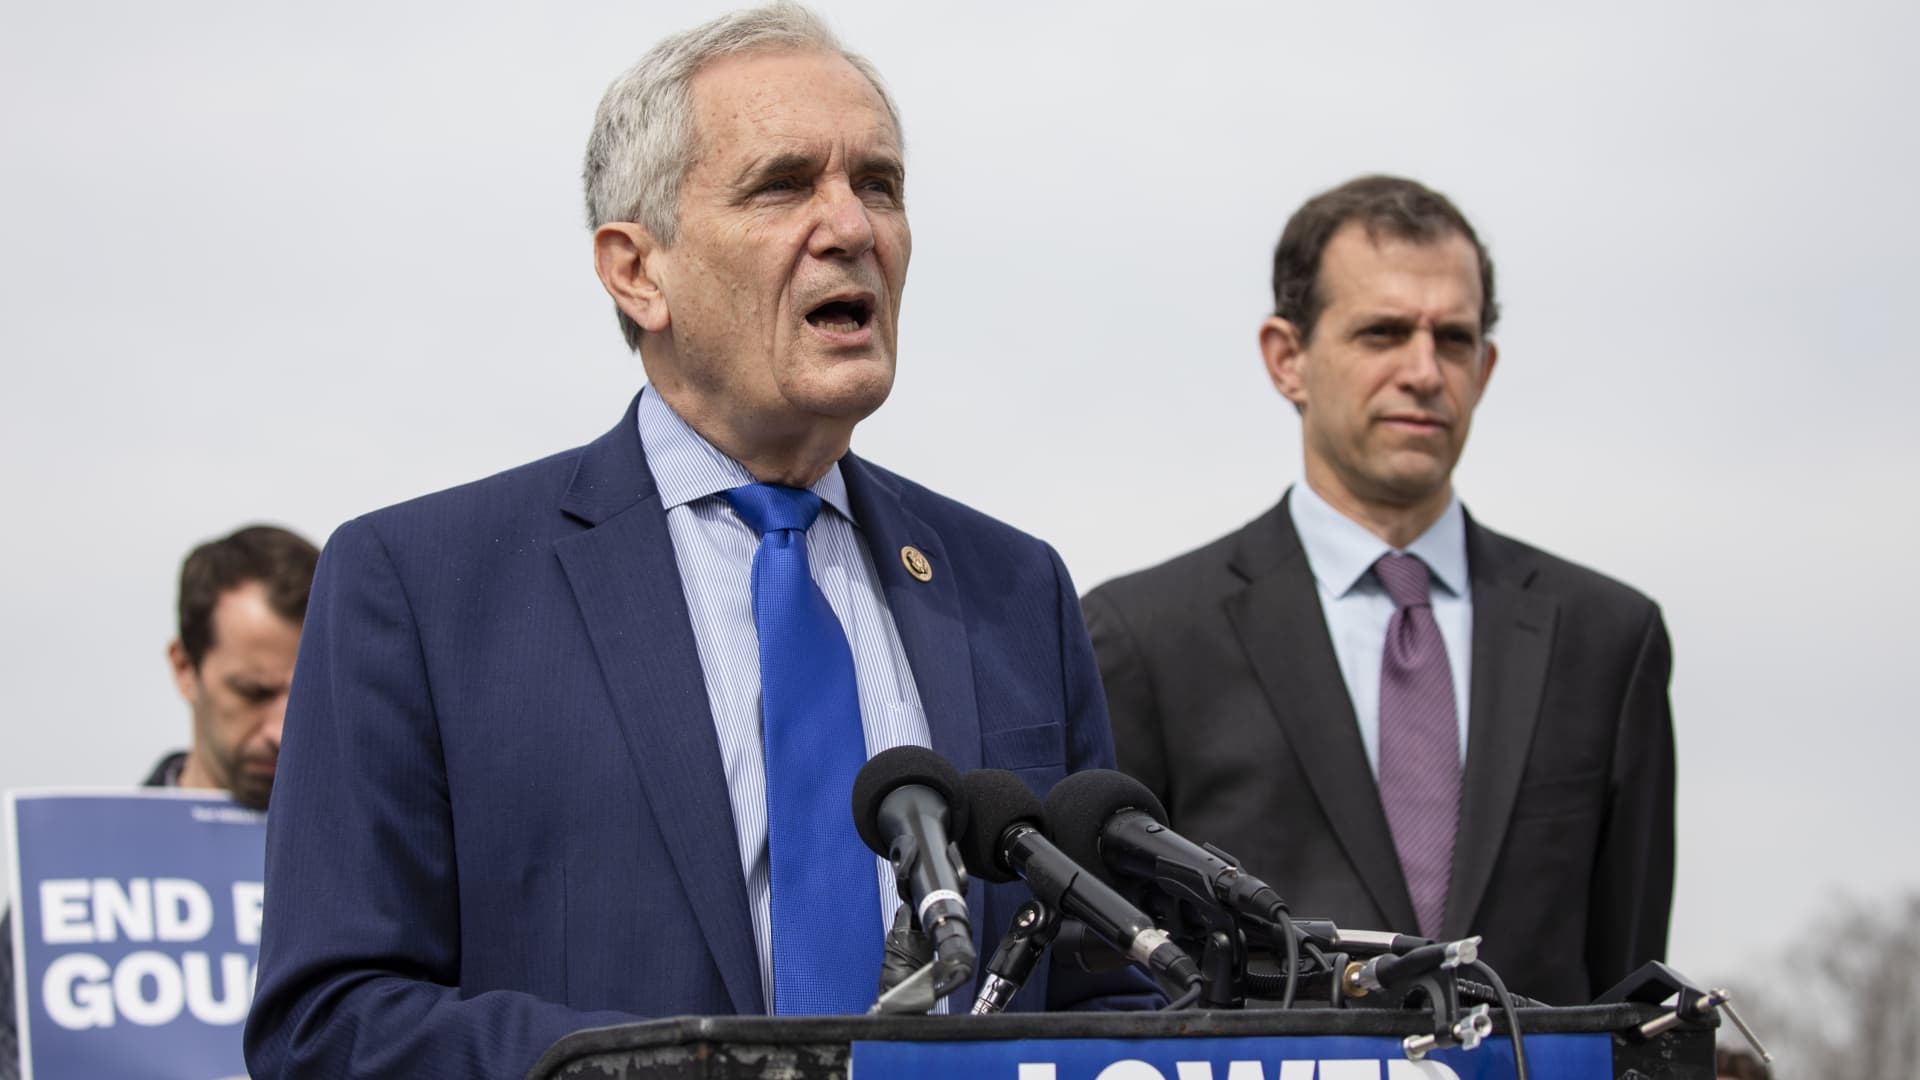 Rep. Lloyd Doggett (D-TX) speaks during a press conference calling for lower drug prices, especially in regards to the coronavirus, on Capitol Hill on March 5, 2020 in Washington, DC.